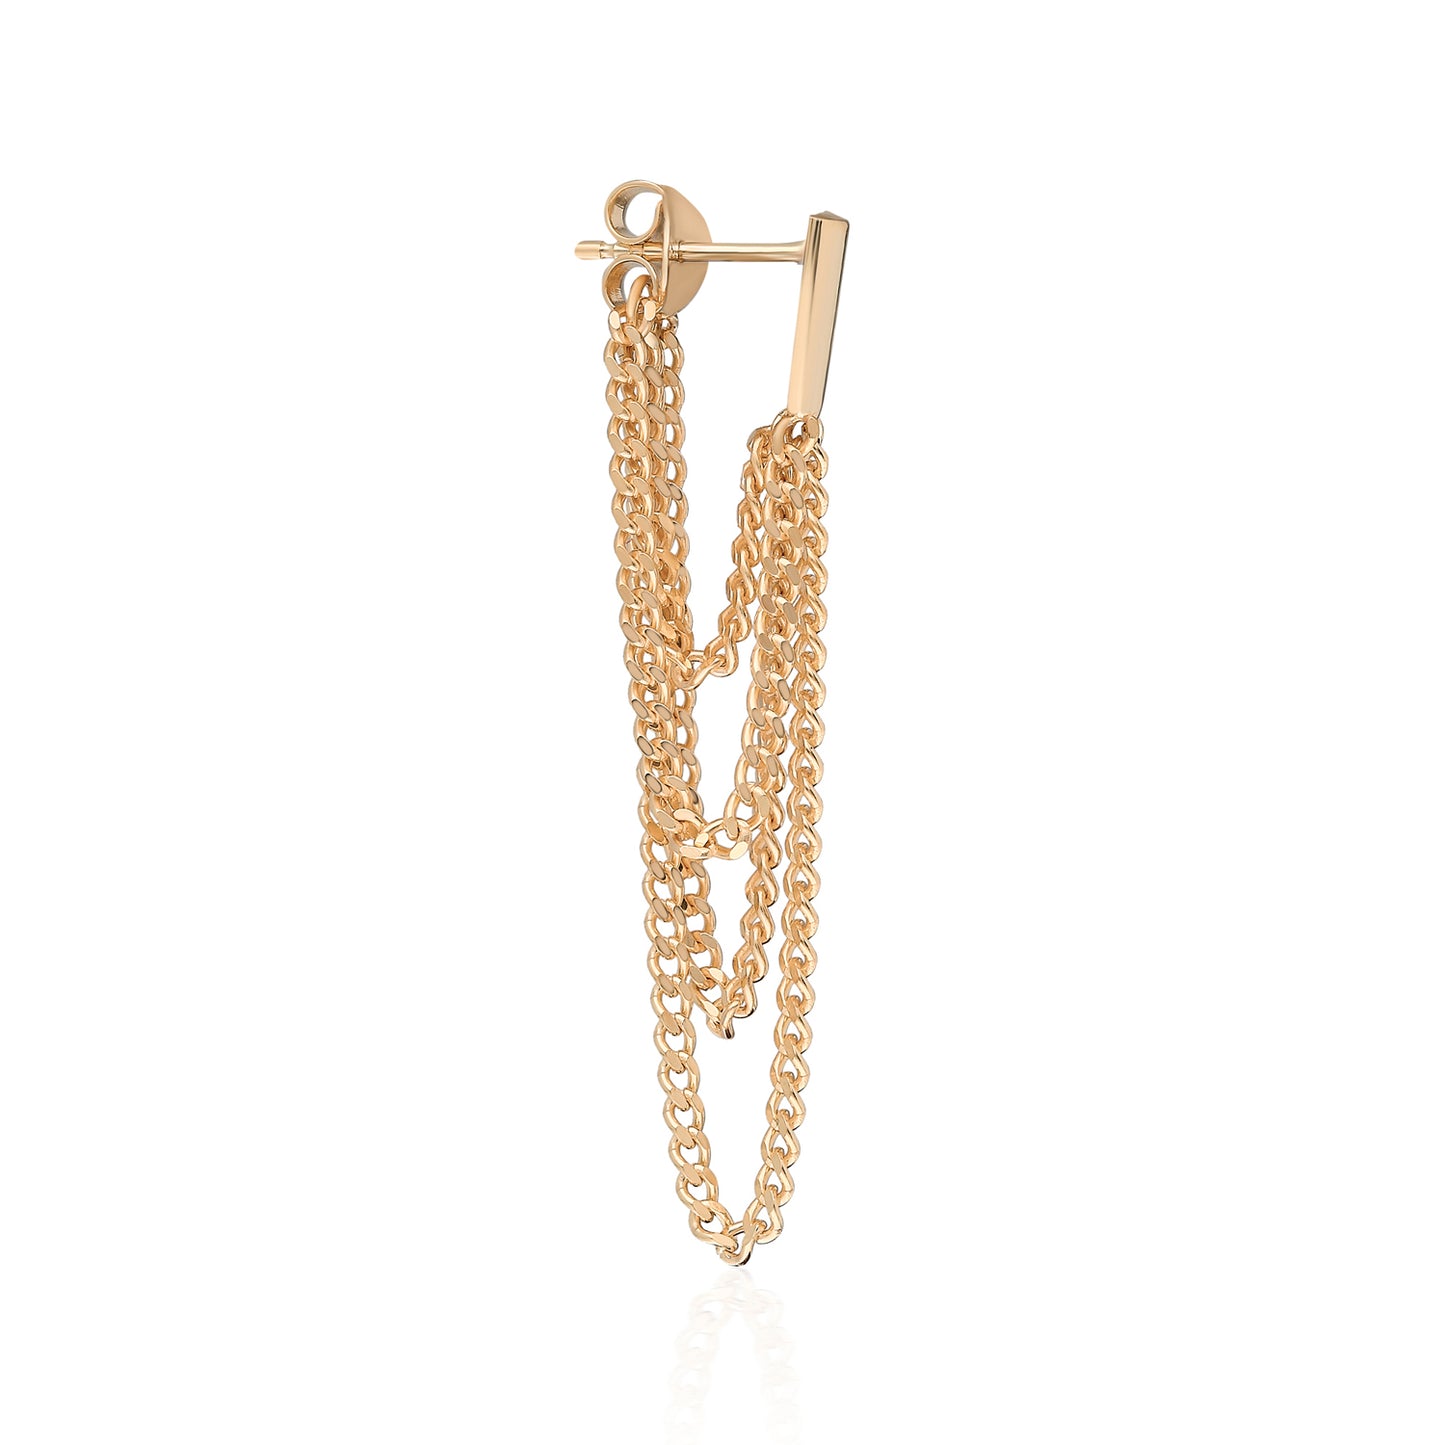 Terry Curb Chain Earring